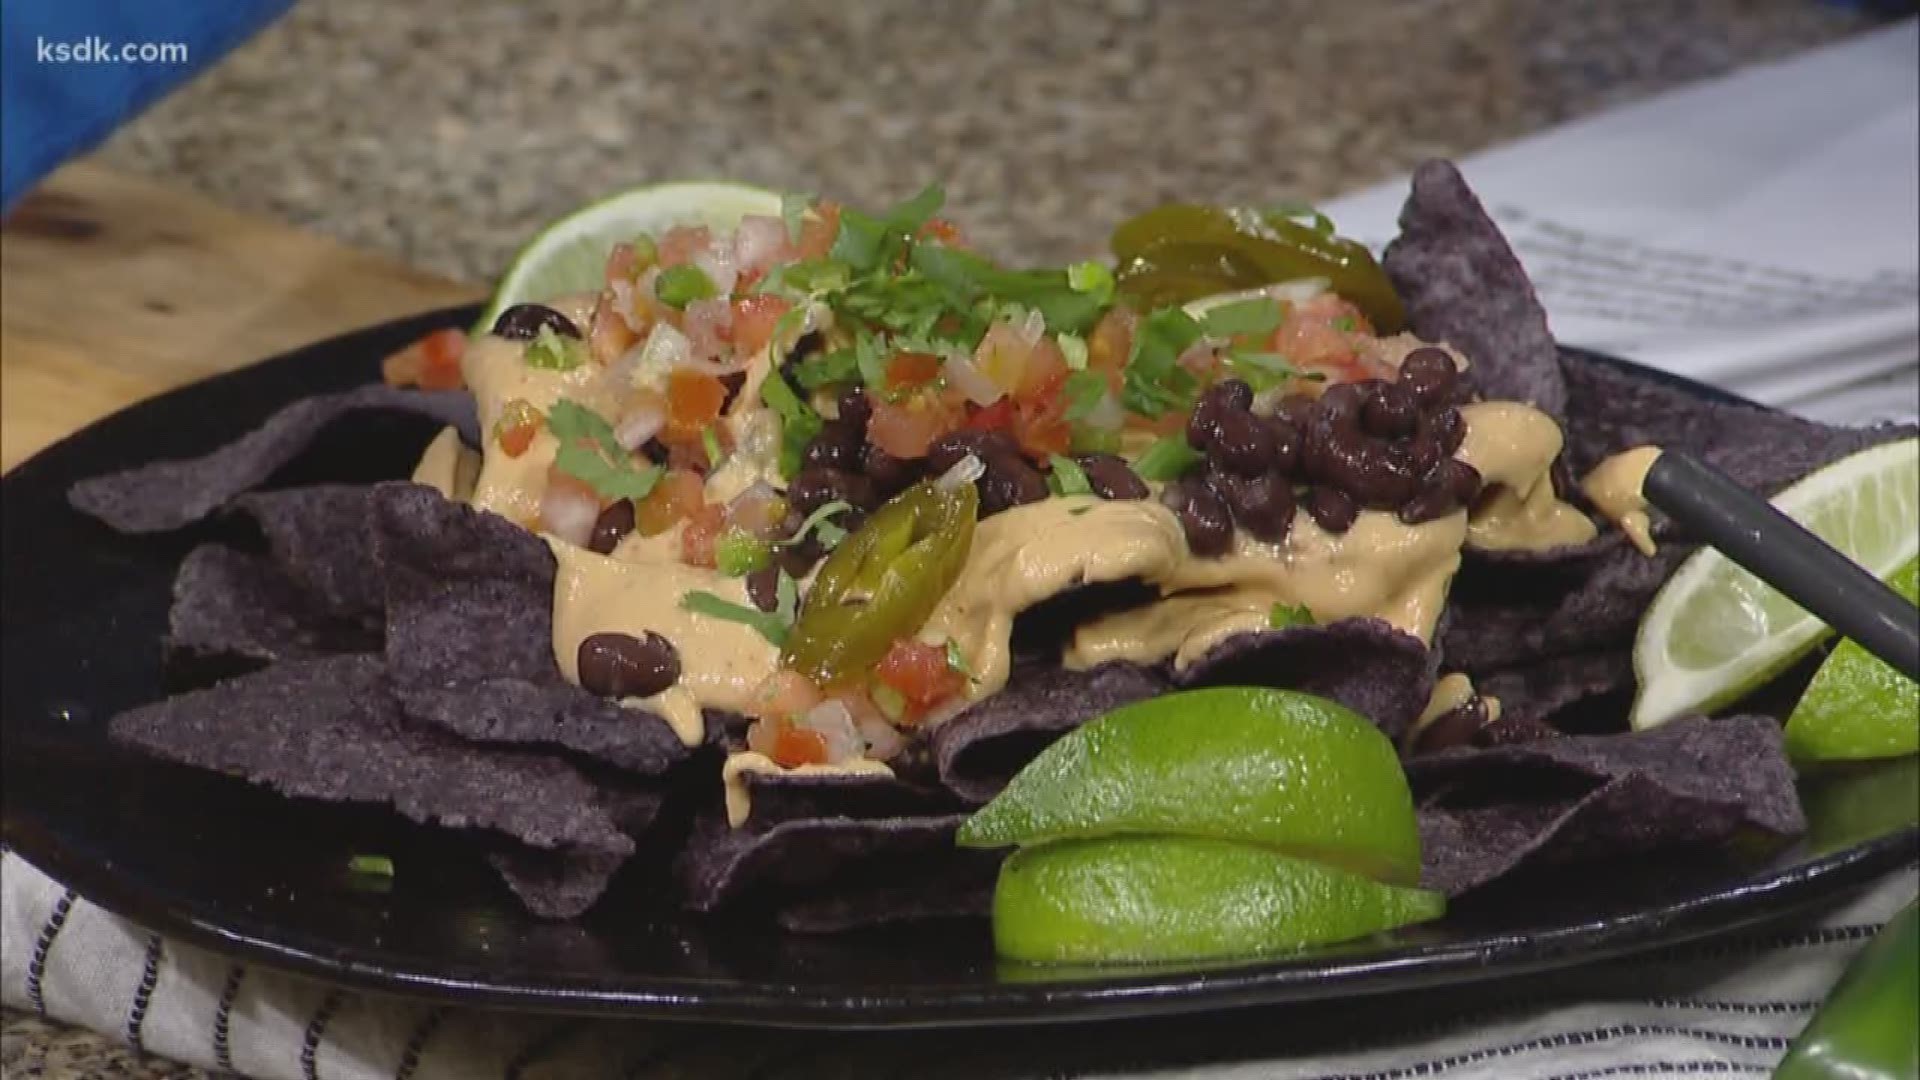 Today?s recipe is a Vegan Queso thanks to Professional Plant-Based Chef and Health Coach, Stephanie Bosch.